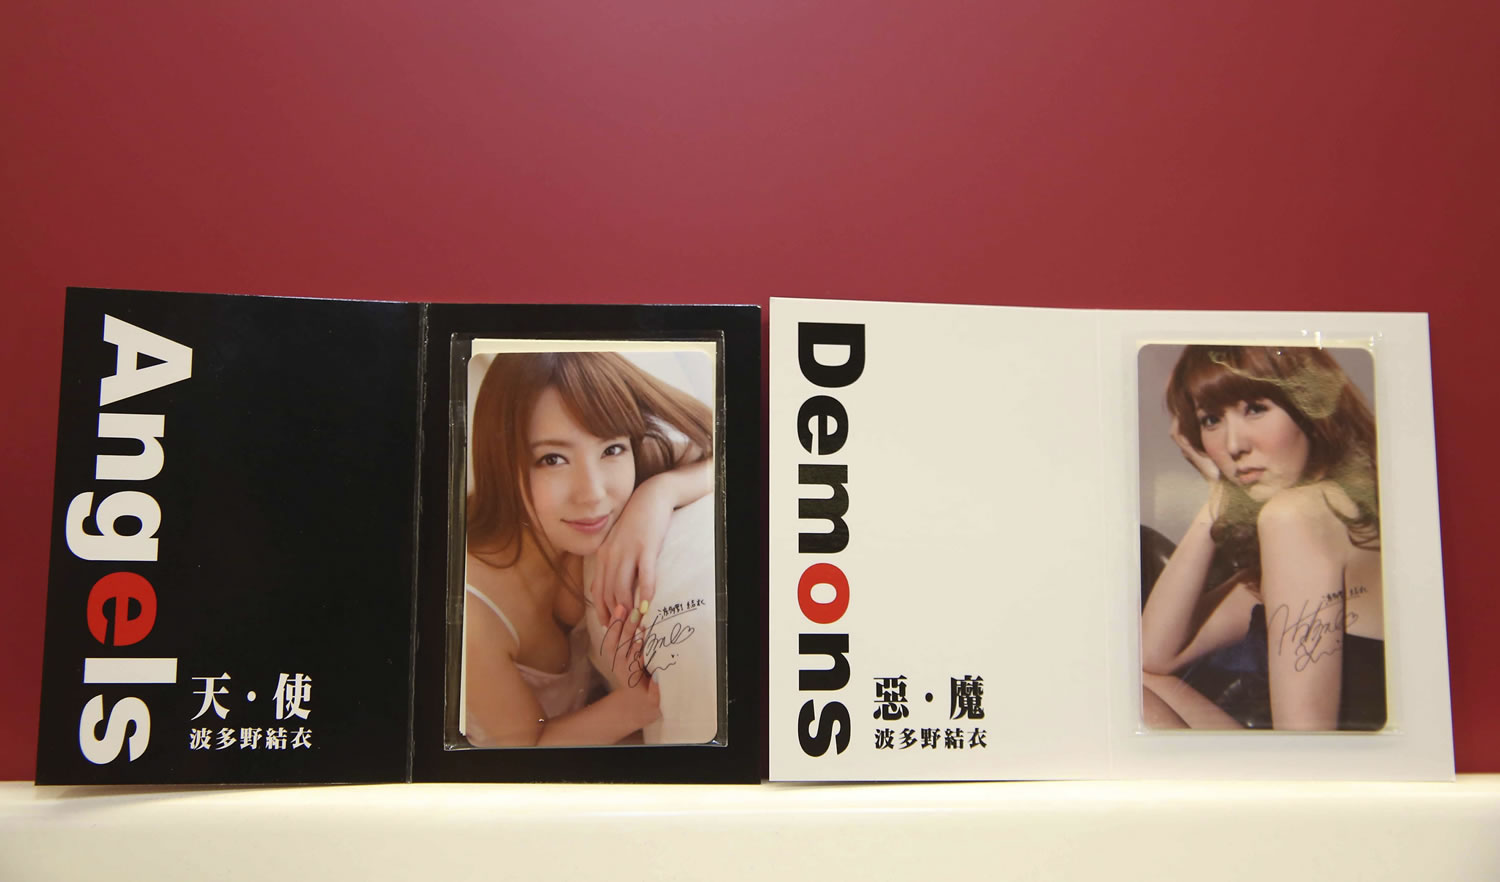 In this photo taken on Aug. 26, 2015, by the Central News Agency, two special edition swipe cards for Taiwan's mass transit are seen on display featuring the clothed image of  27-year-old, Japanese porn star Yui Hatano, in Taipei, Taiwan.  Despite strong opposition, the 15,000 limited-edition cards sold out within hours overnight via a telephone hotline.